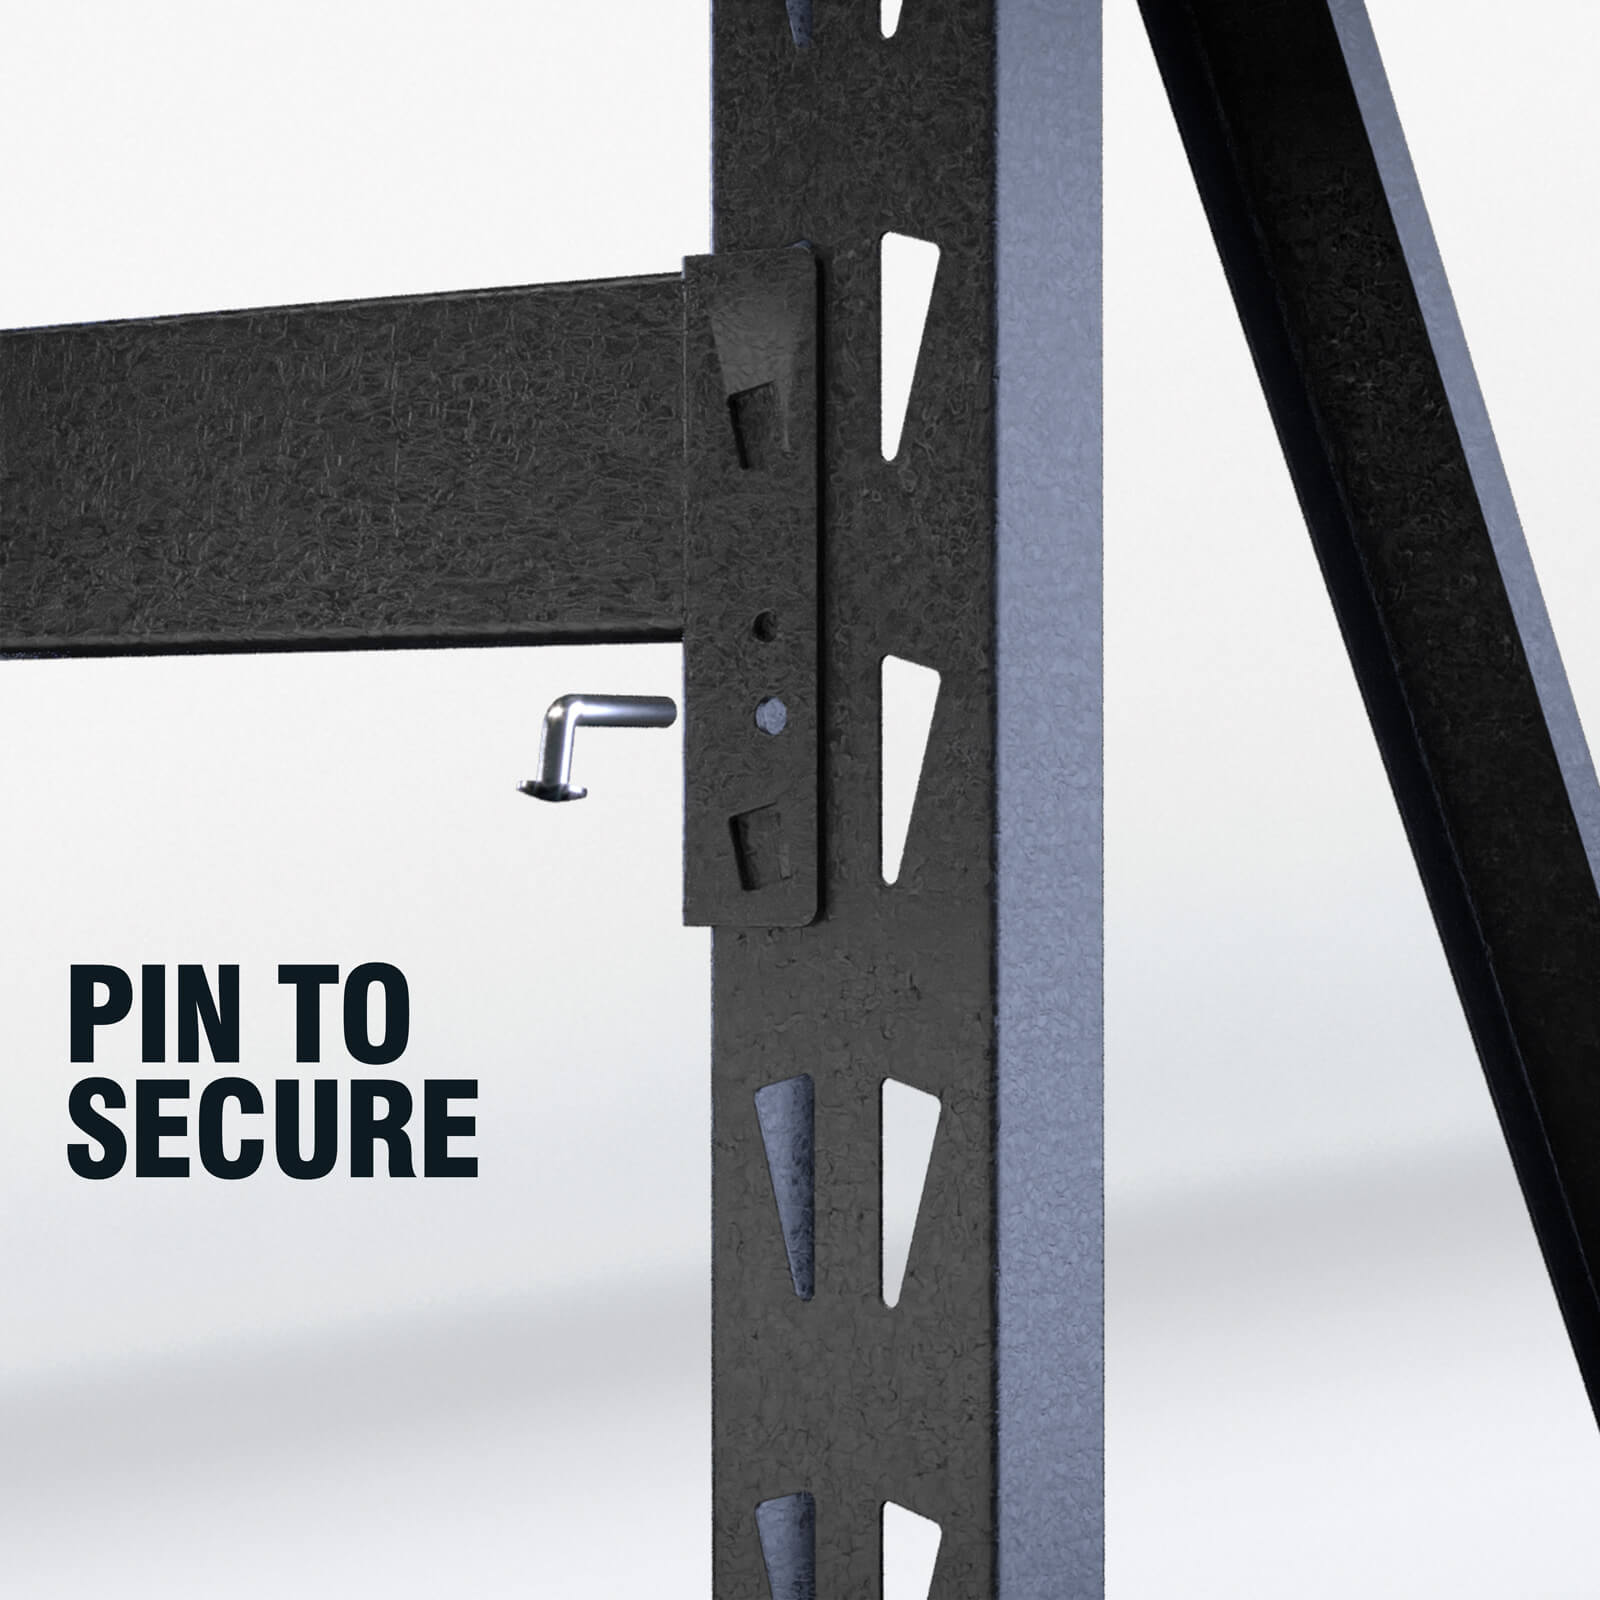 Pin to secure